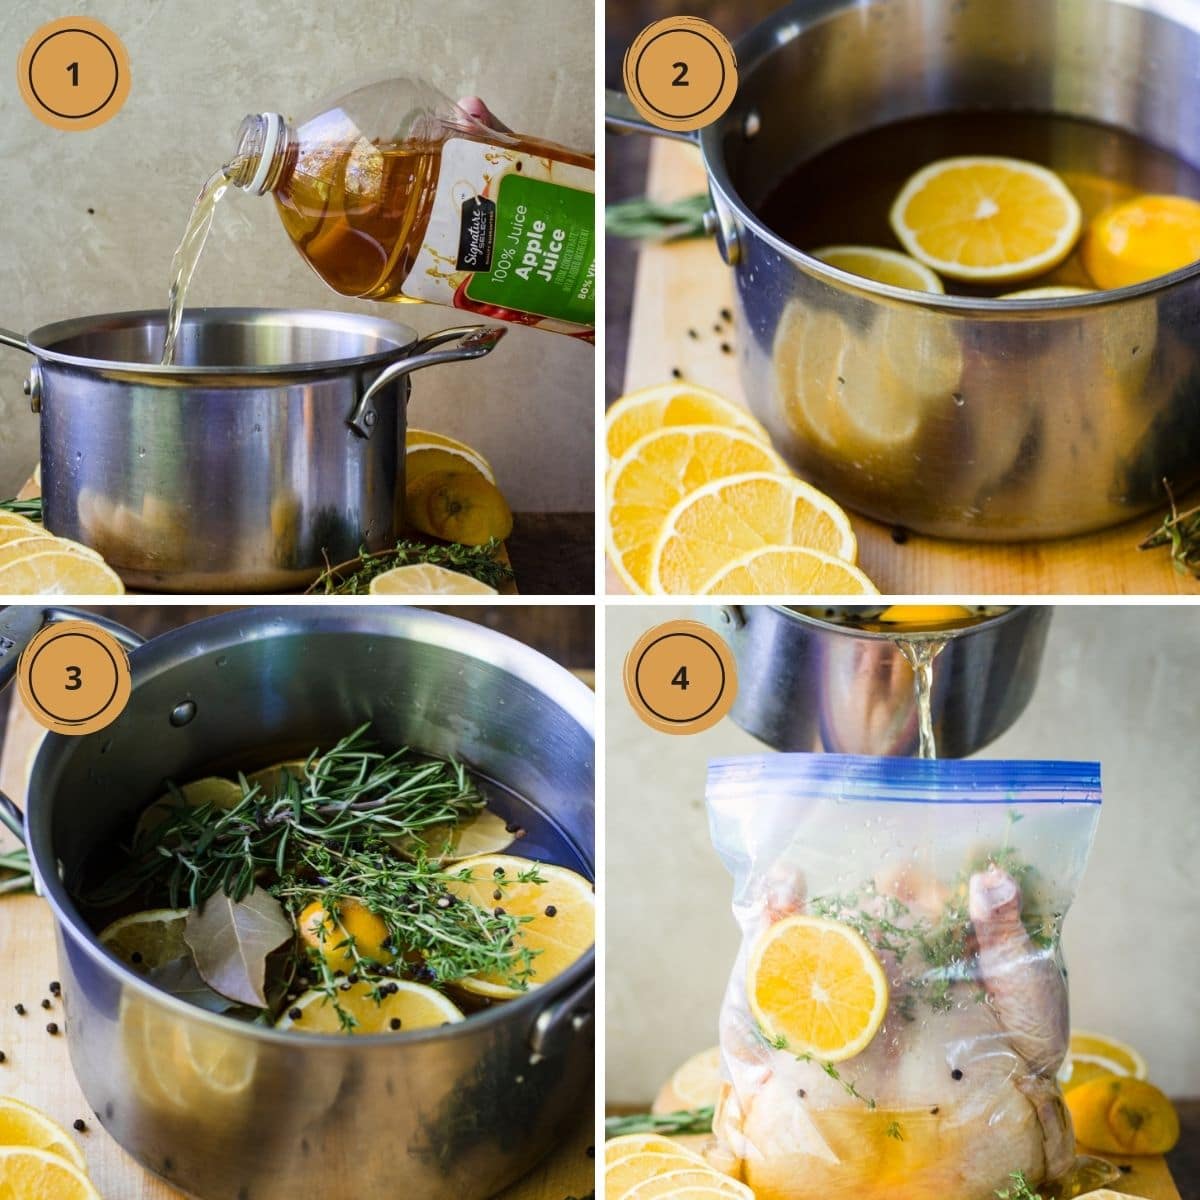 A collage showing steps to make apple juice brine.